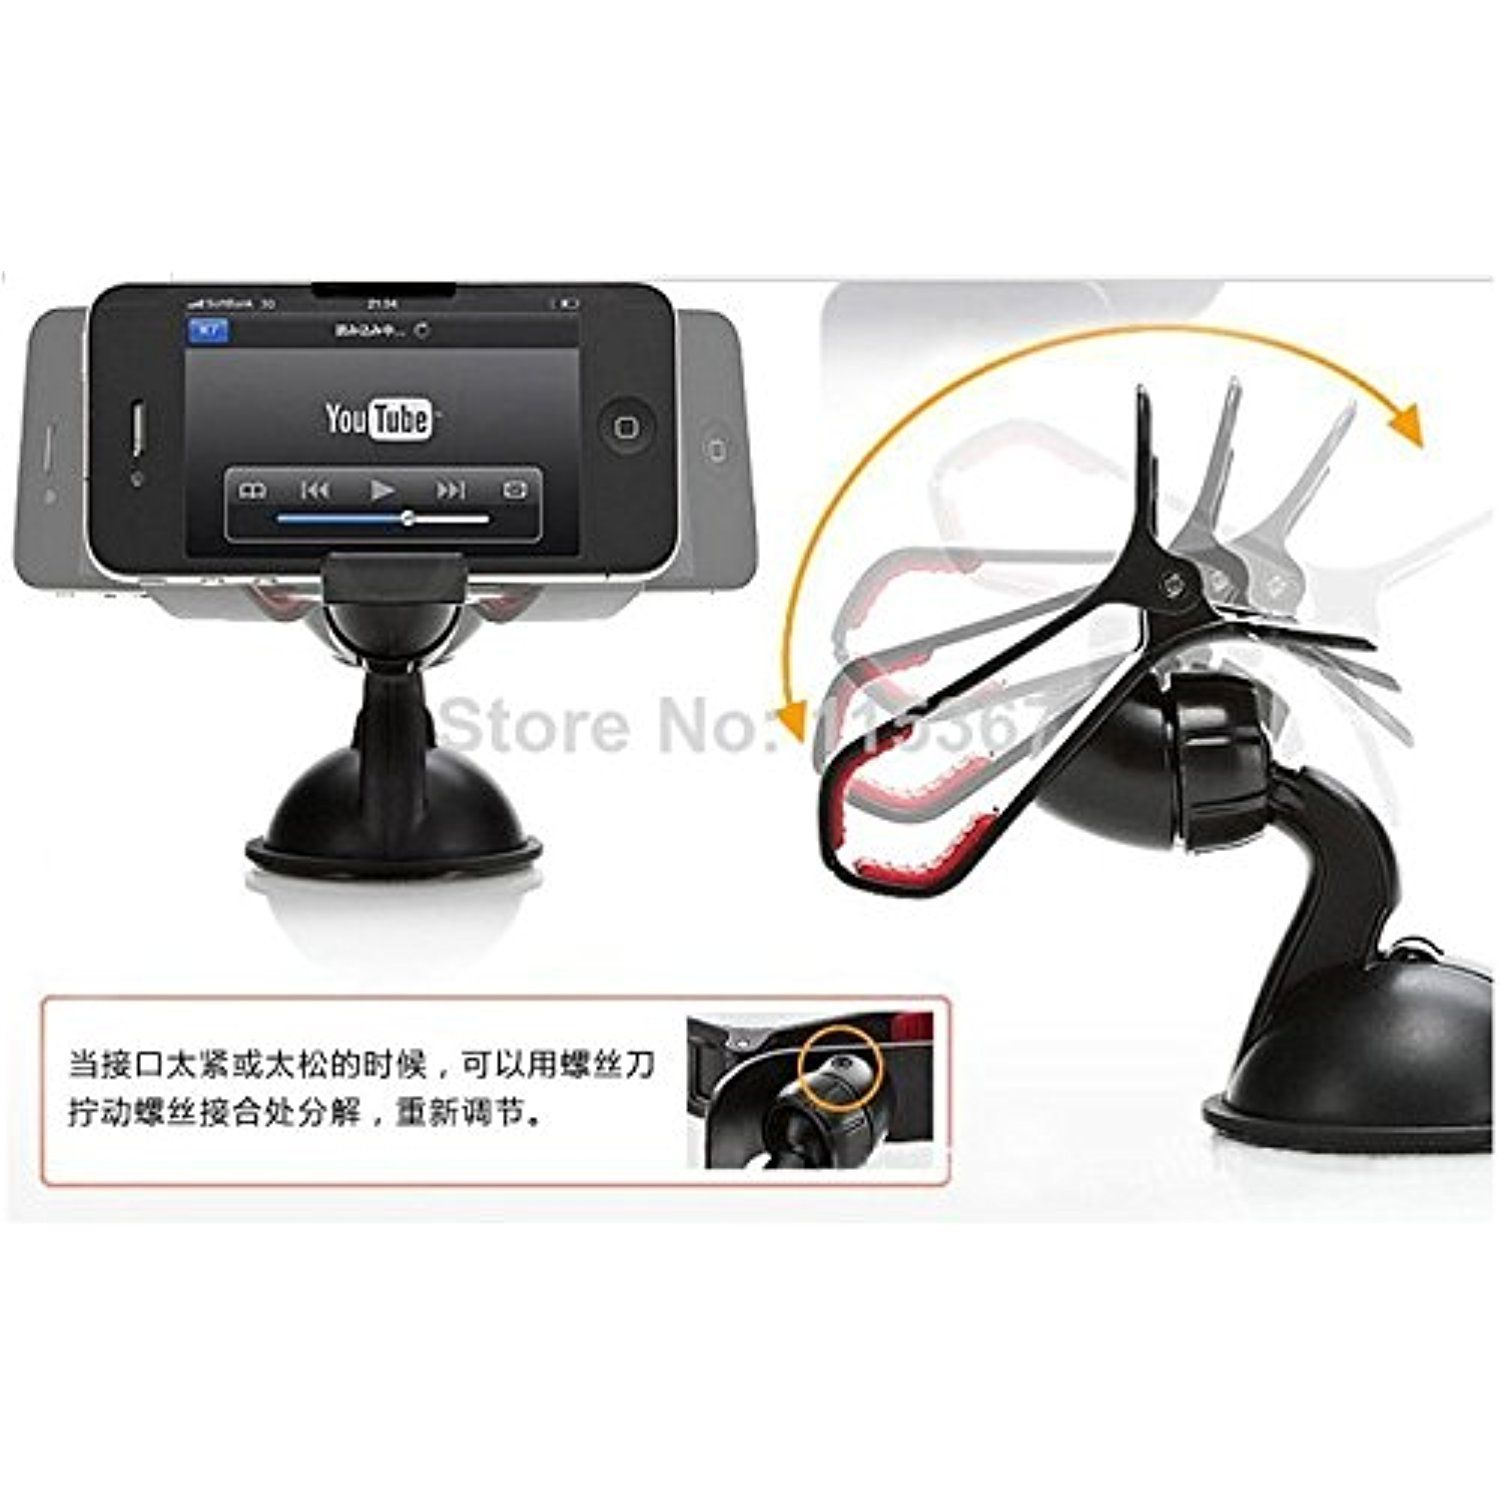 Mighty Gadget - Car Windshield Stand Mount Holder phone Bracket for ...